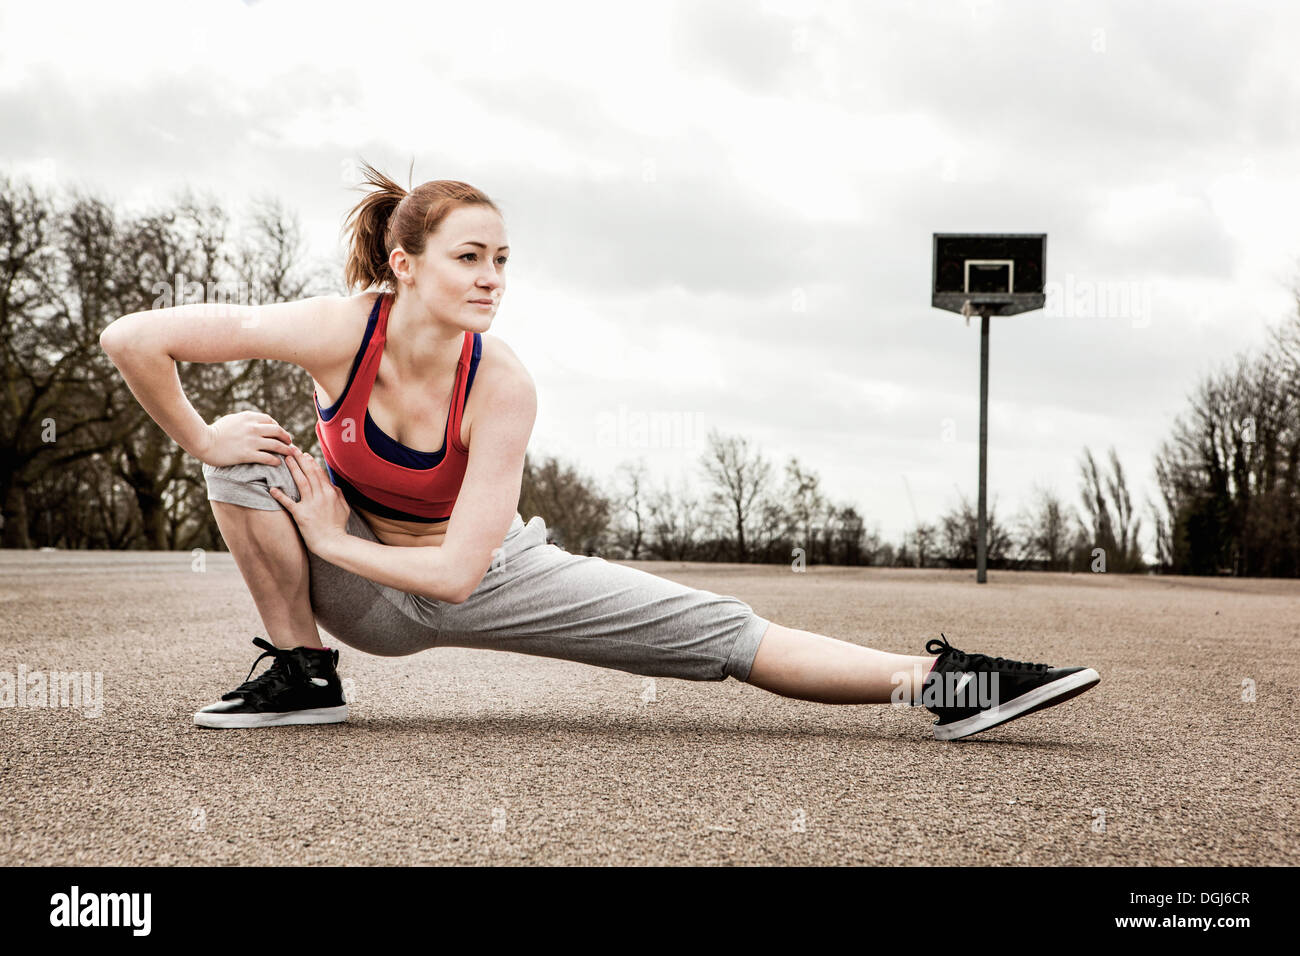 Woman stretching left leg and bending right leg on court Stock Photo